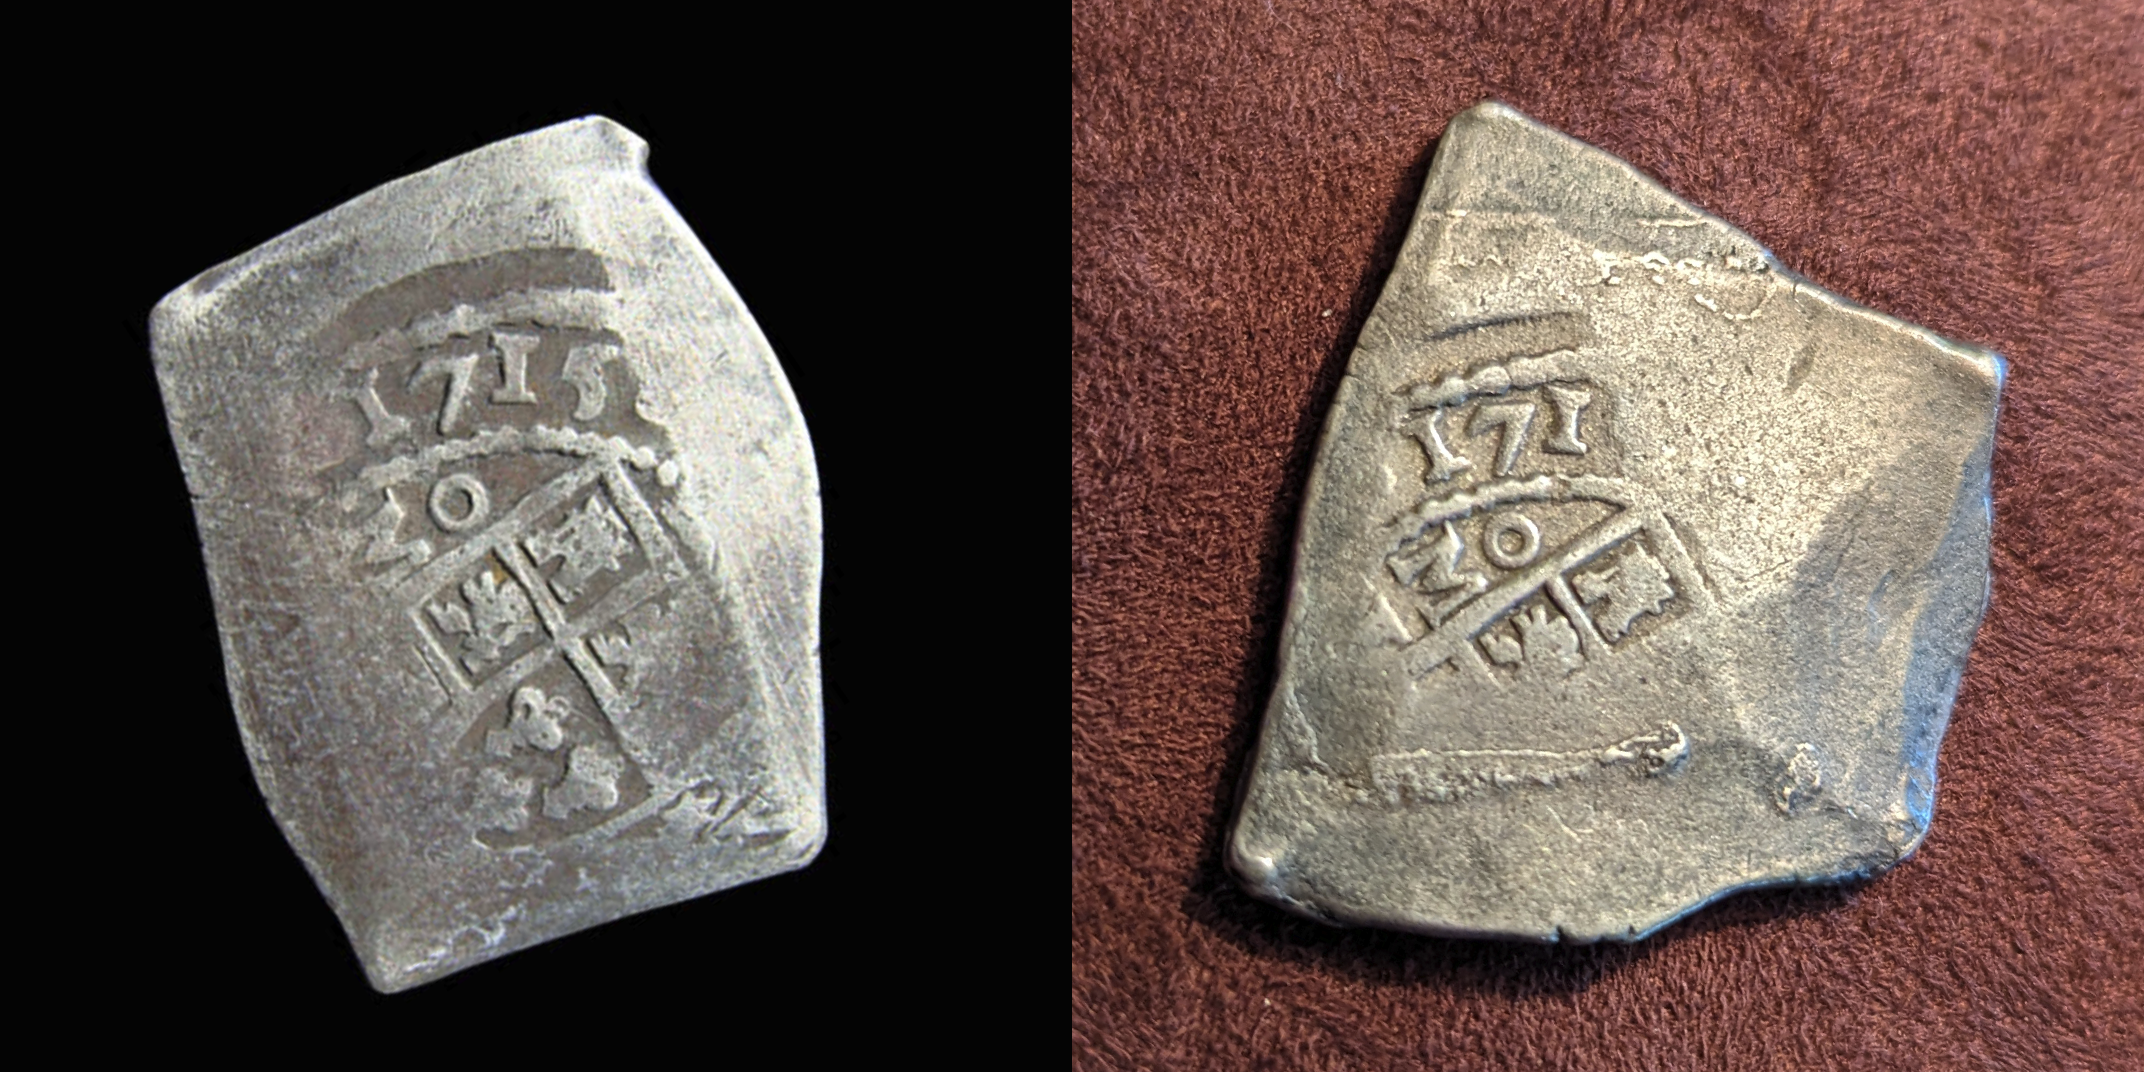 More On the Misidentified Coin - 1715 Fleet Society